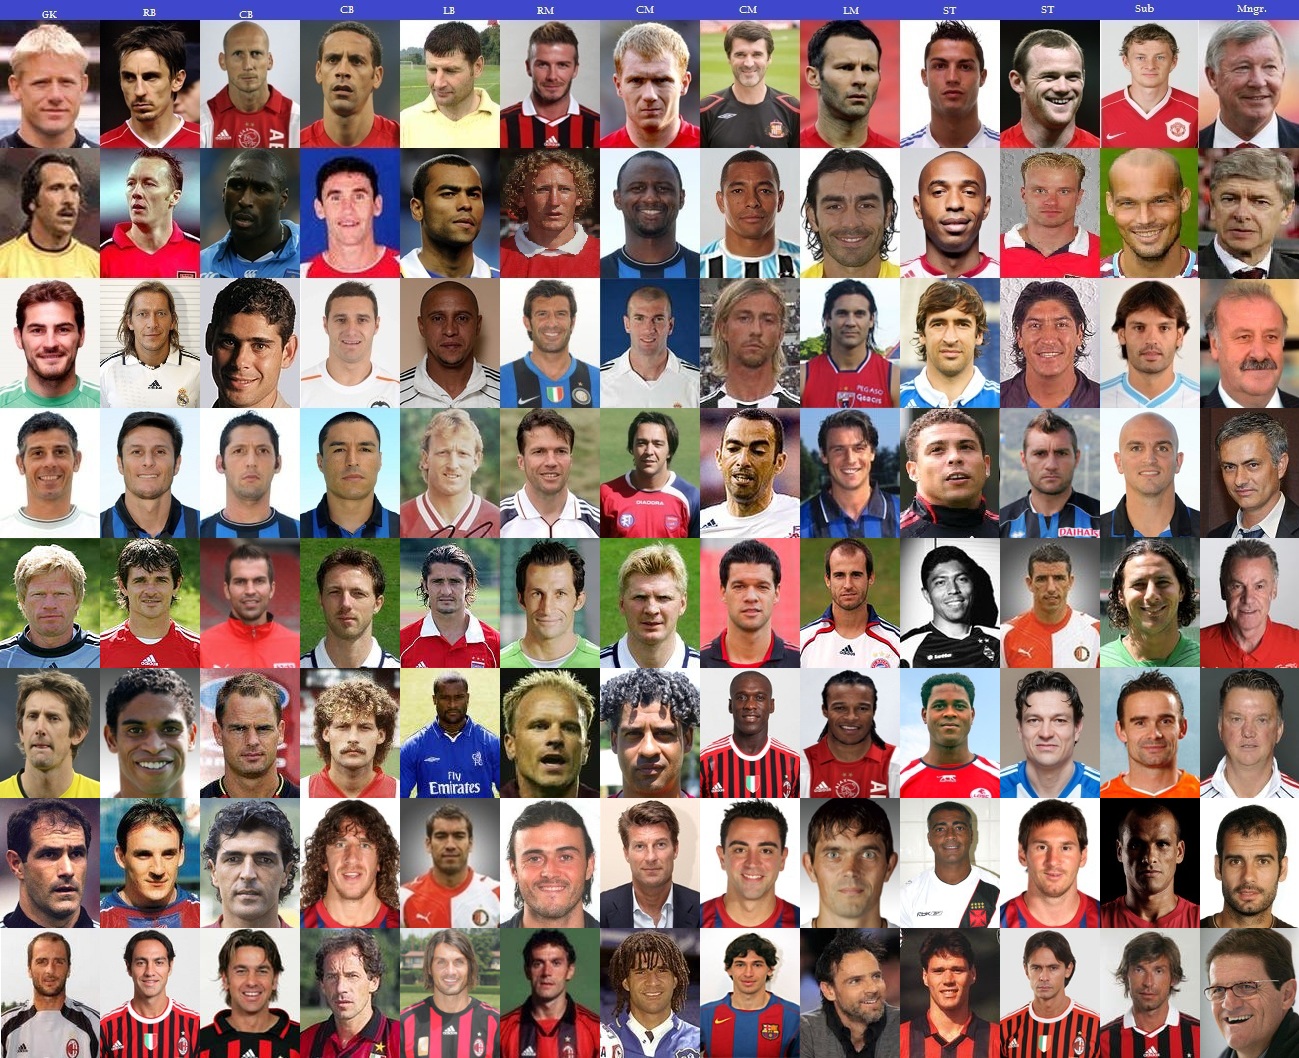 Football Legends Pictures to Pin on Pinterest - PinsDaddy